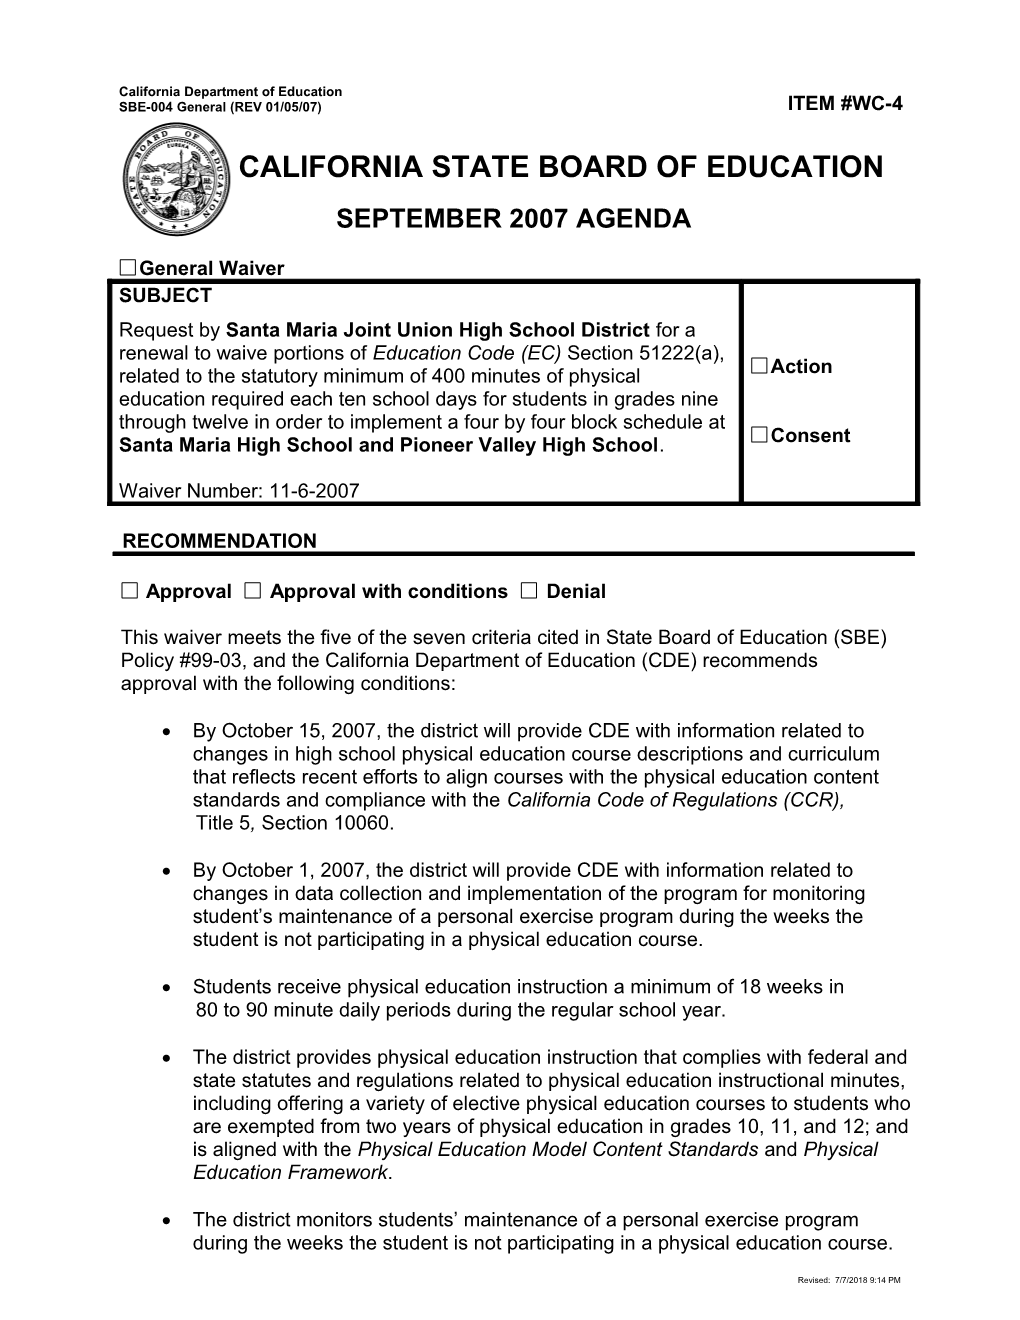 September 2007 Waiver Agenda Item WC4 - Meeting Agendas (CA State Board of Education)